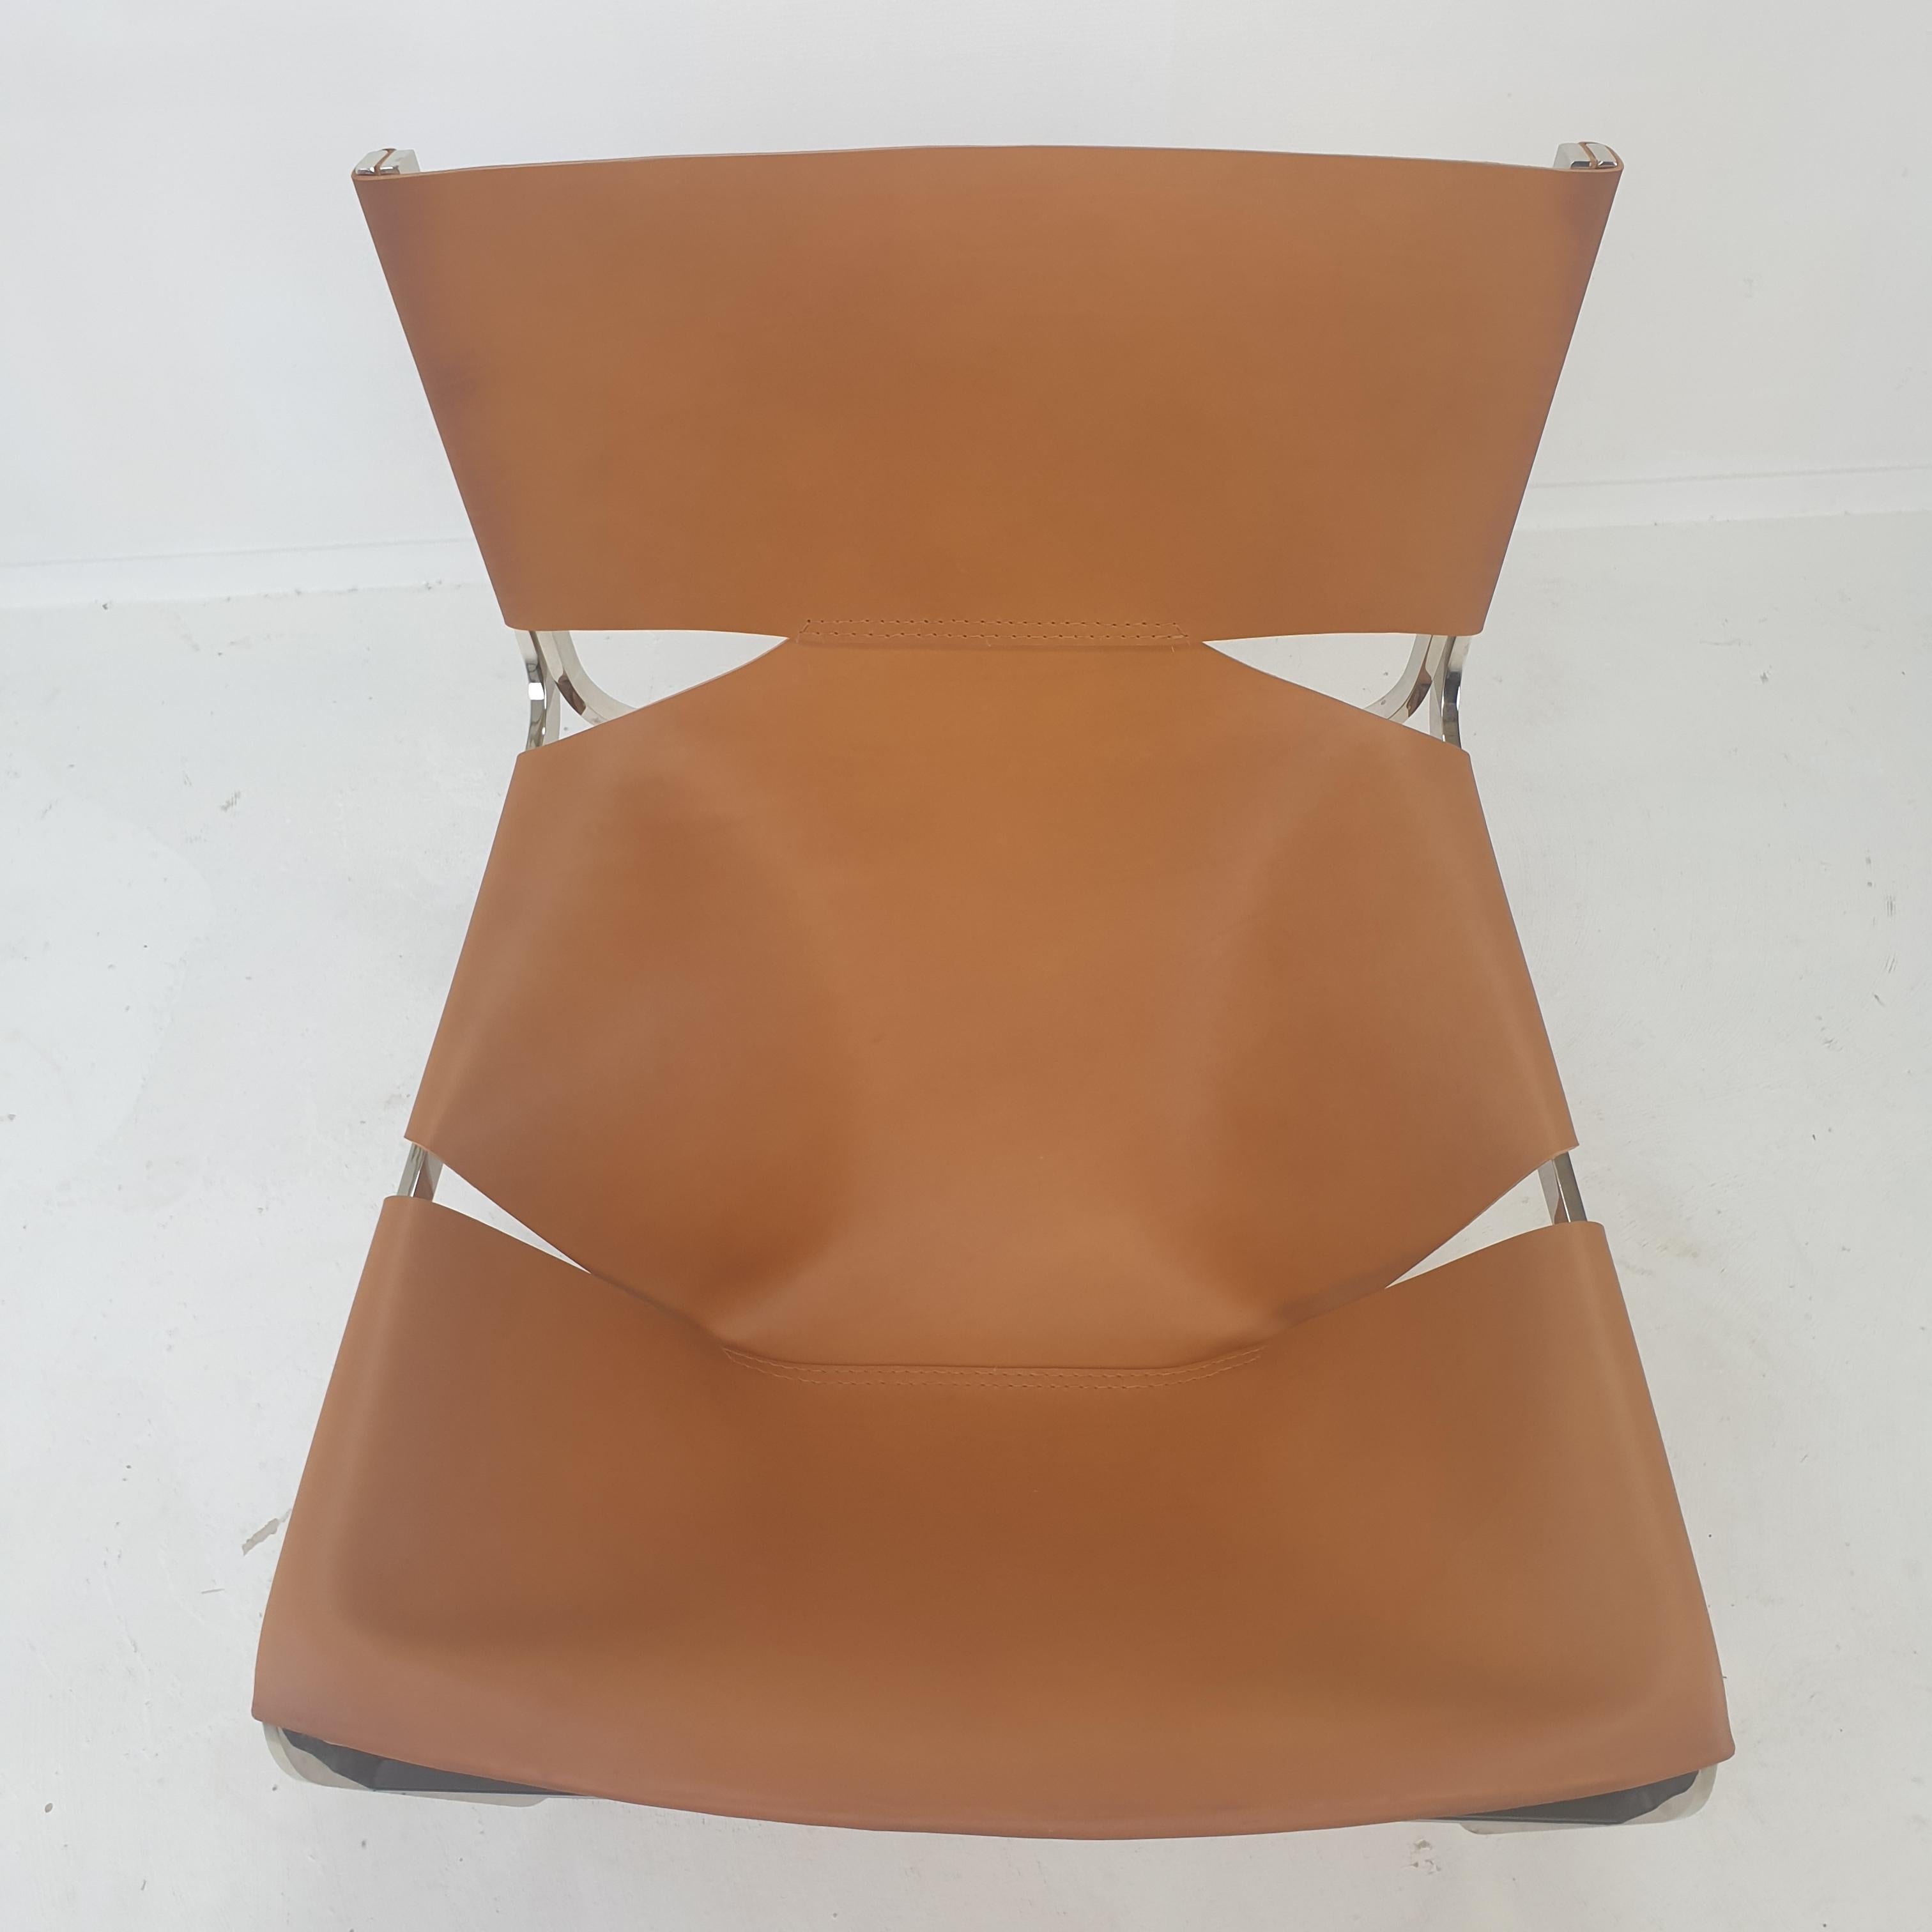 Set of 2 Model F444 Lounge Chairs by Pierre Paulin for Artifort, 1960s For Sale 2